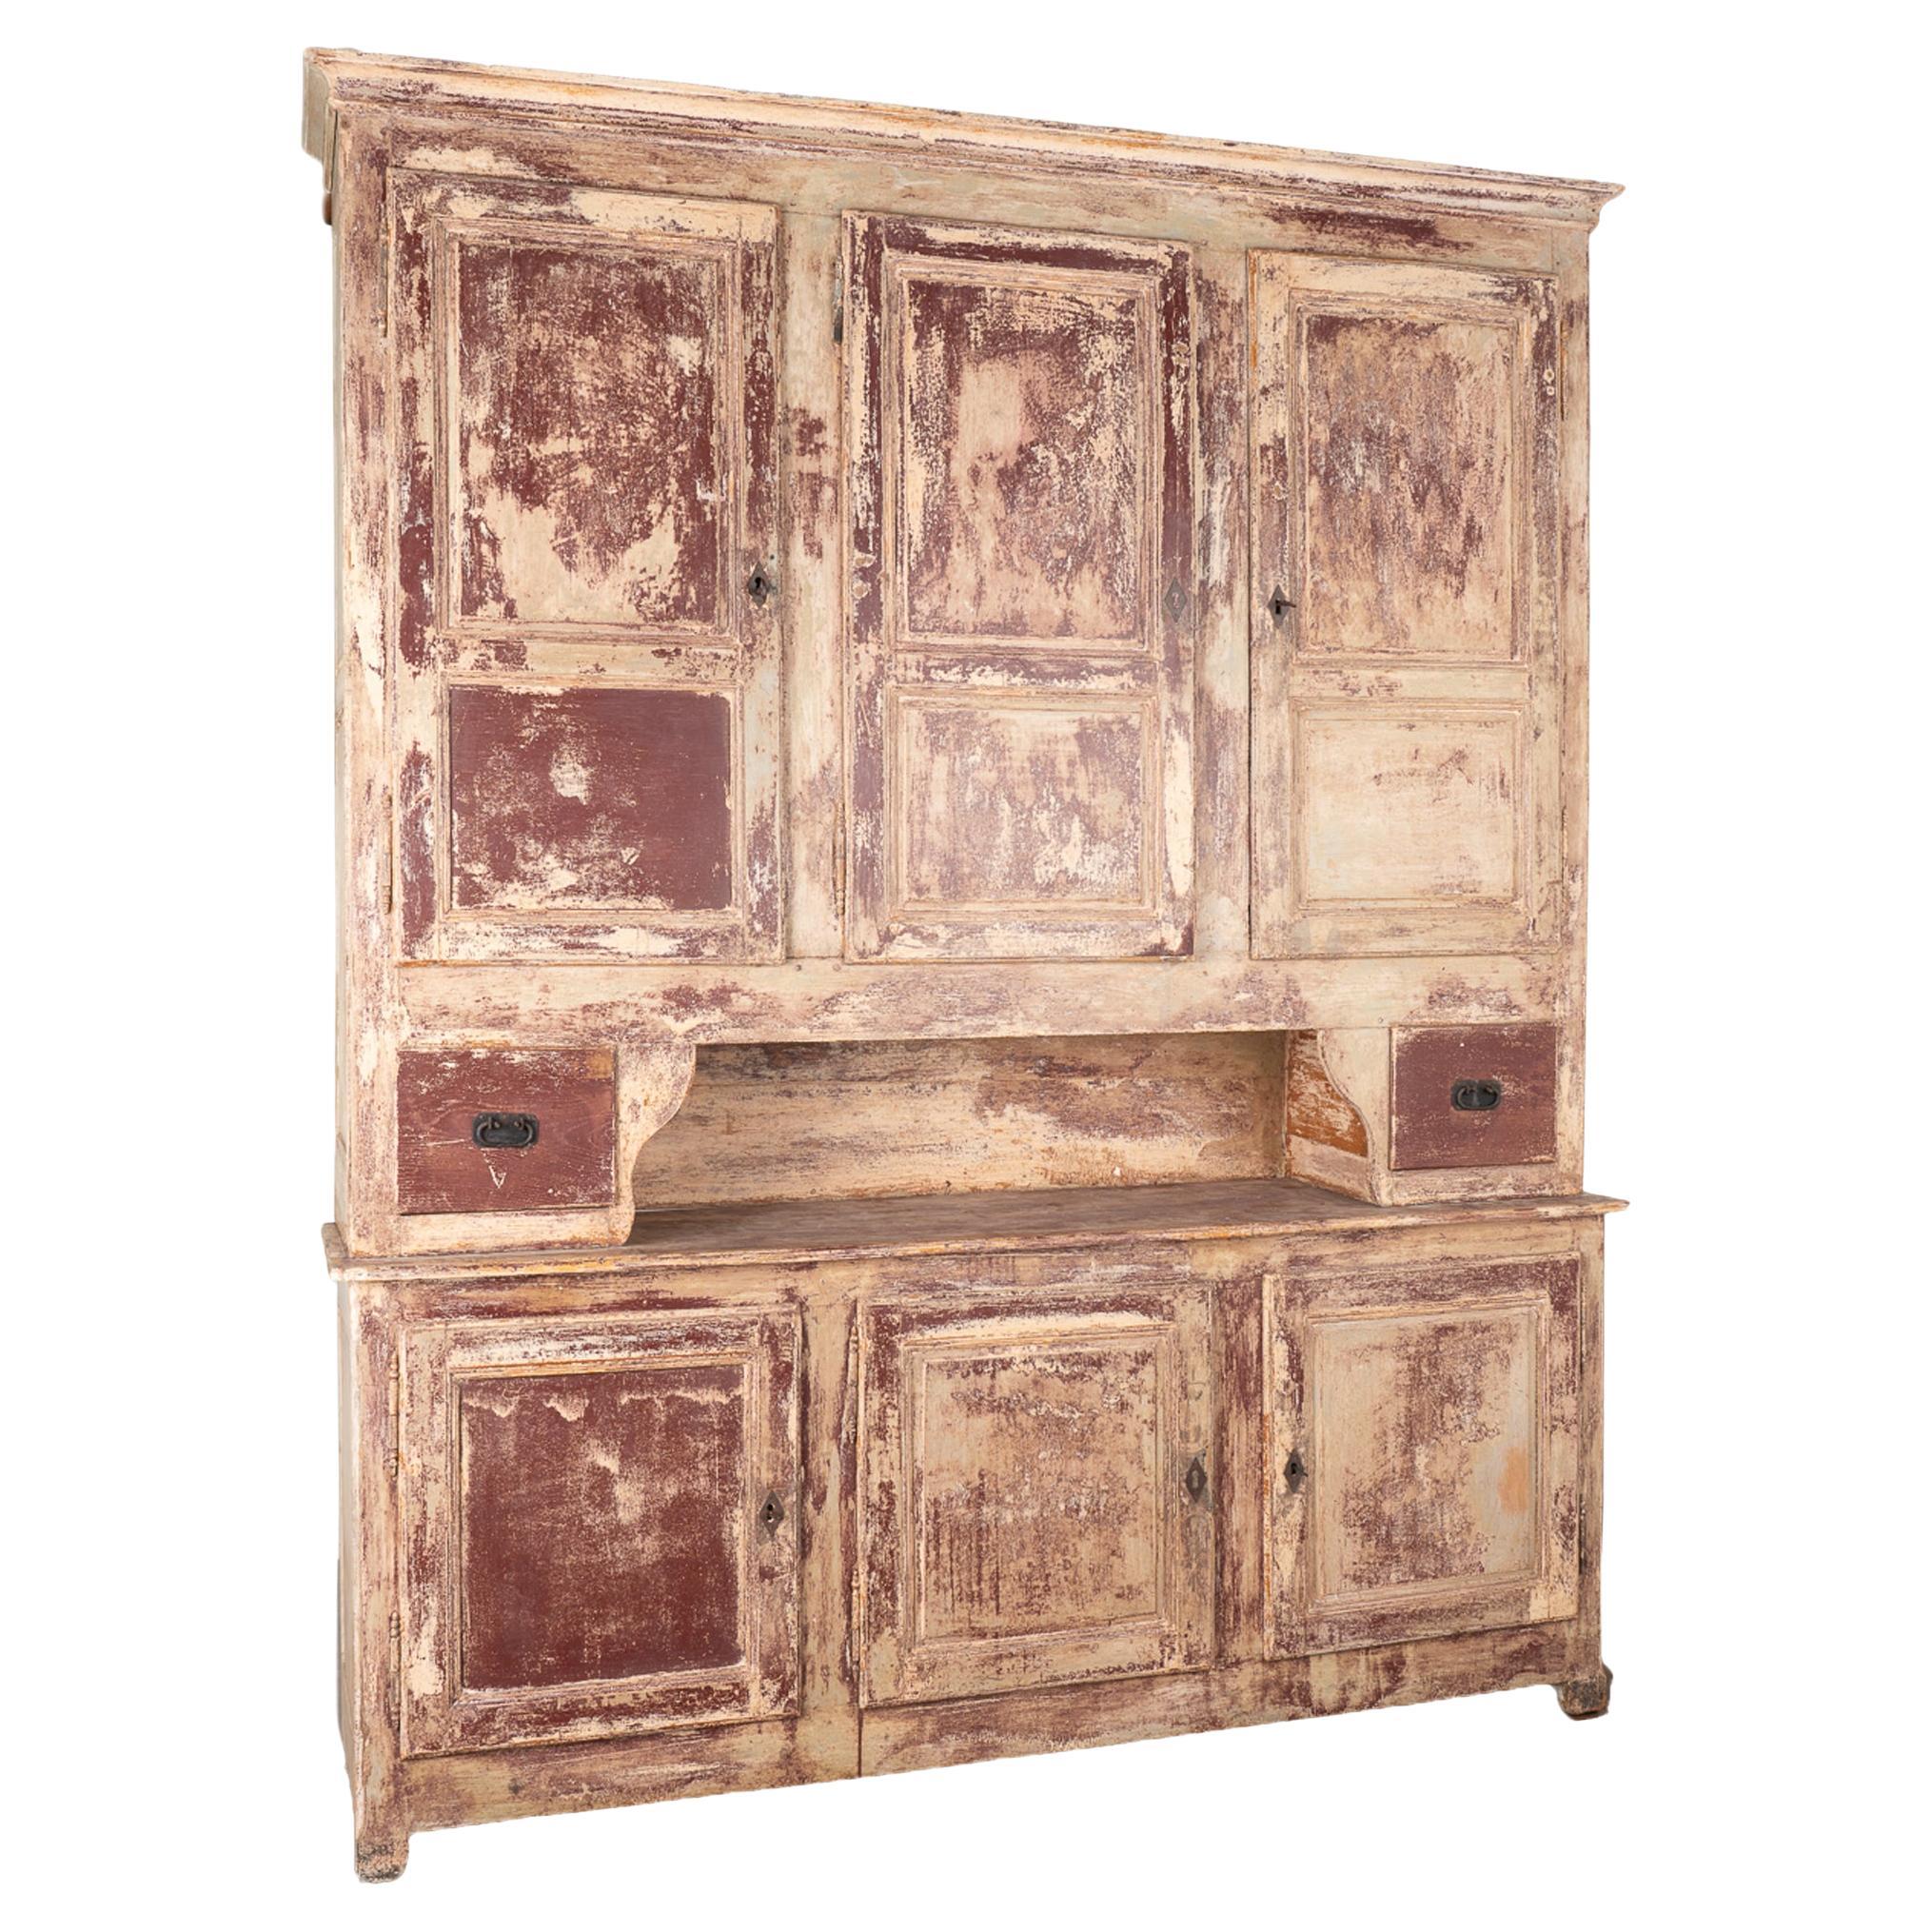 Large Painted Shop Cabinet Wall Unit from France, circa 1880